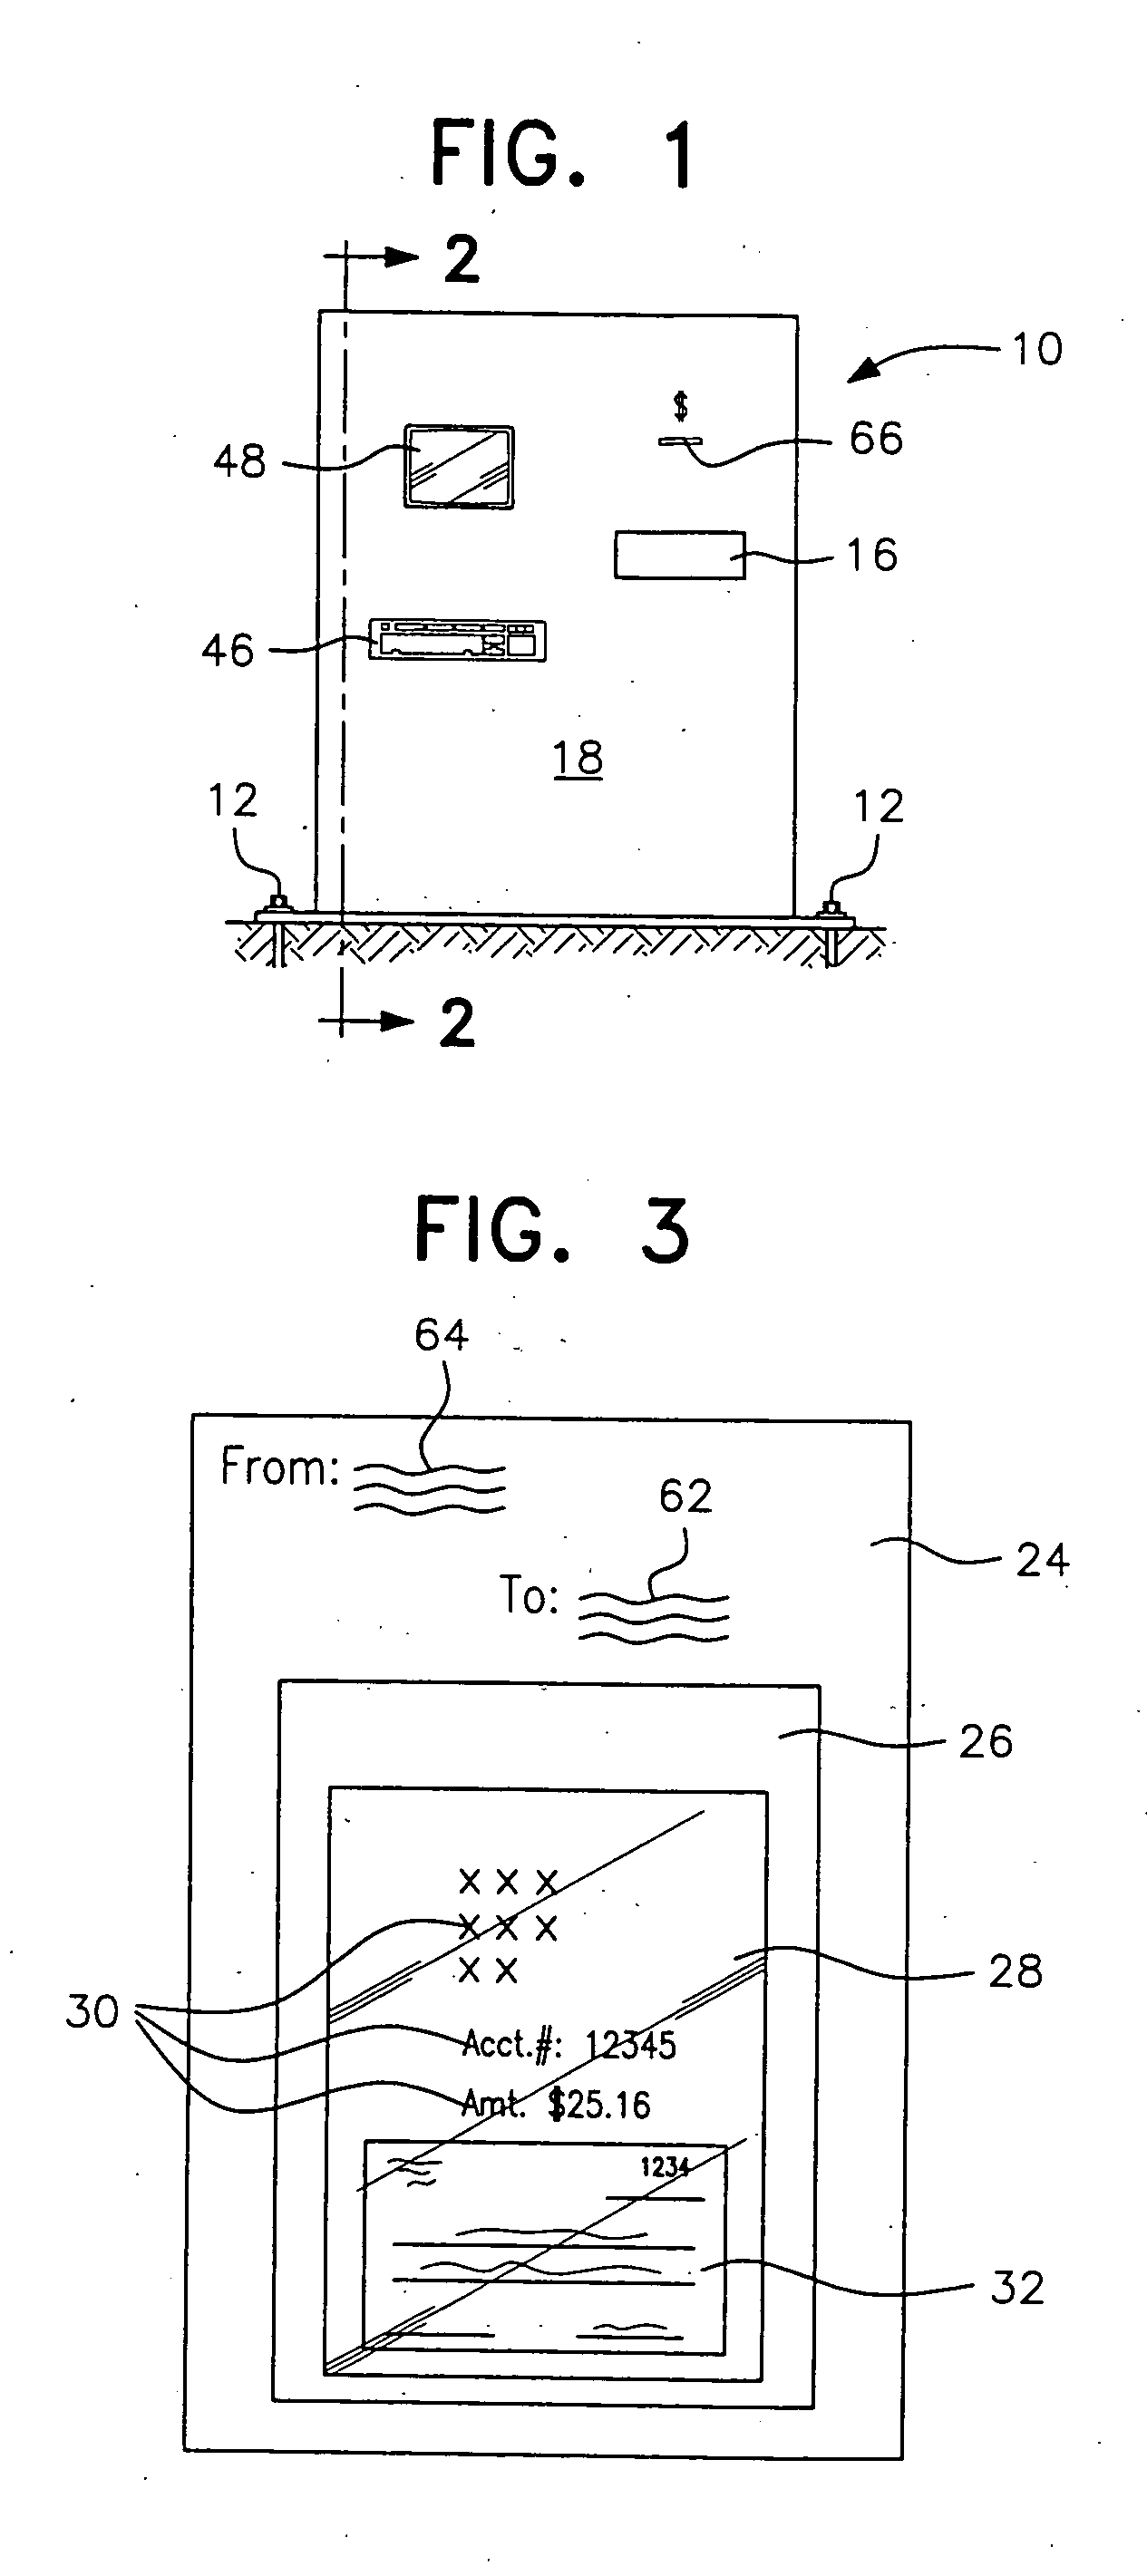 System and method of providing proof of delivery